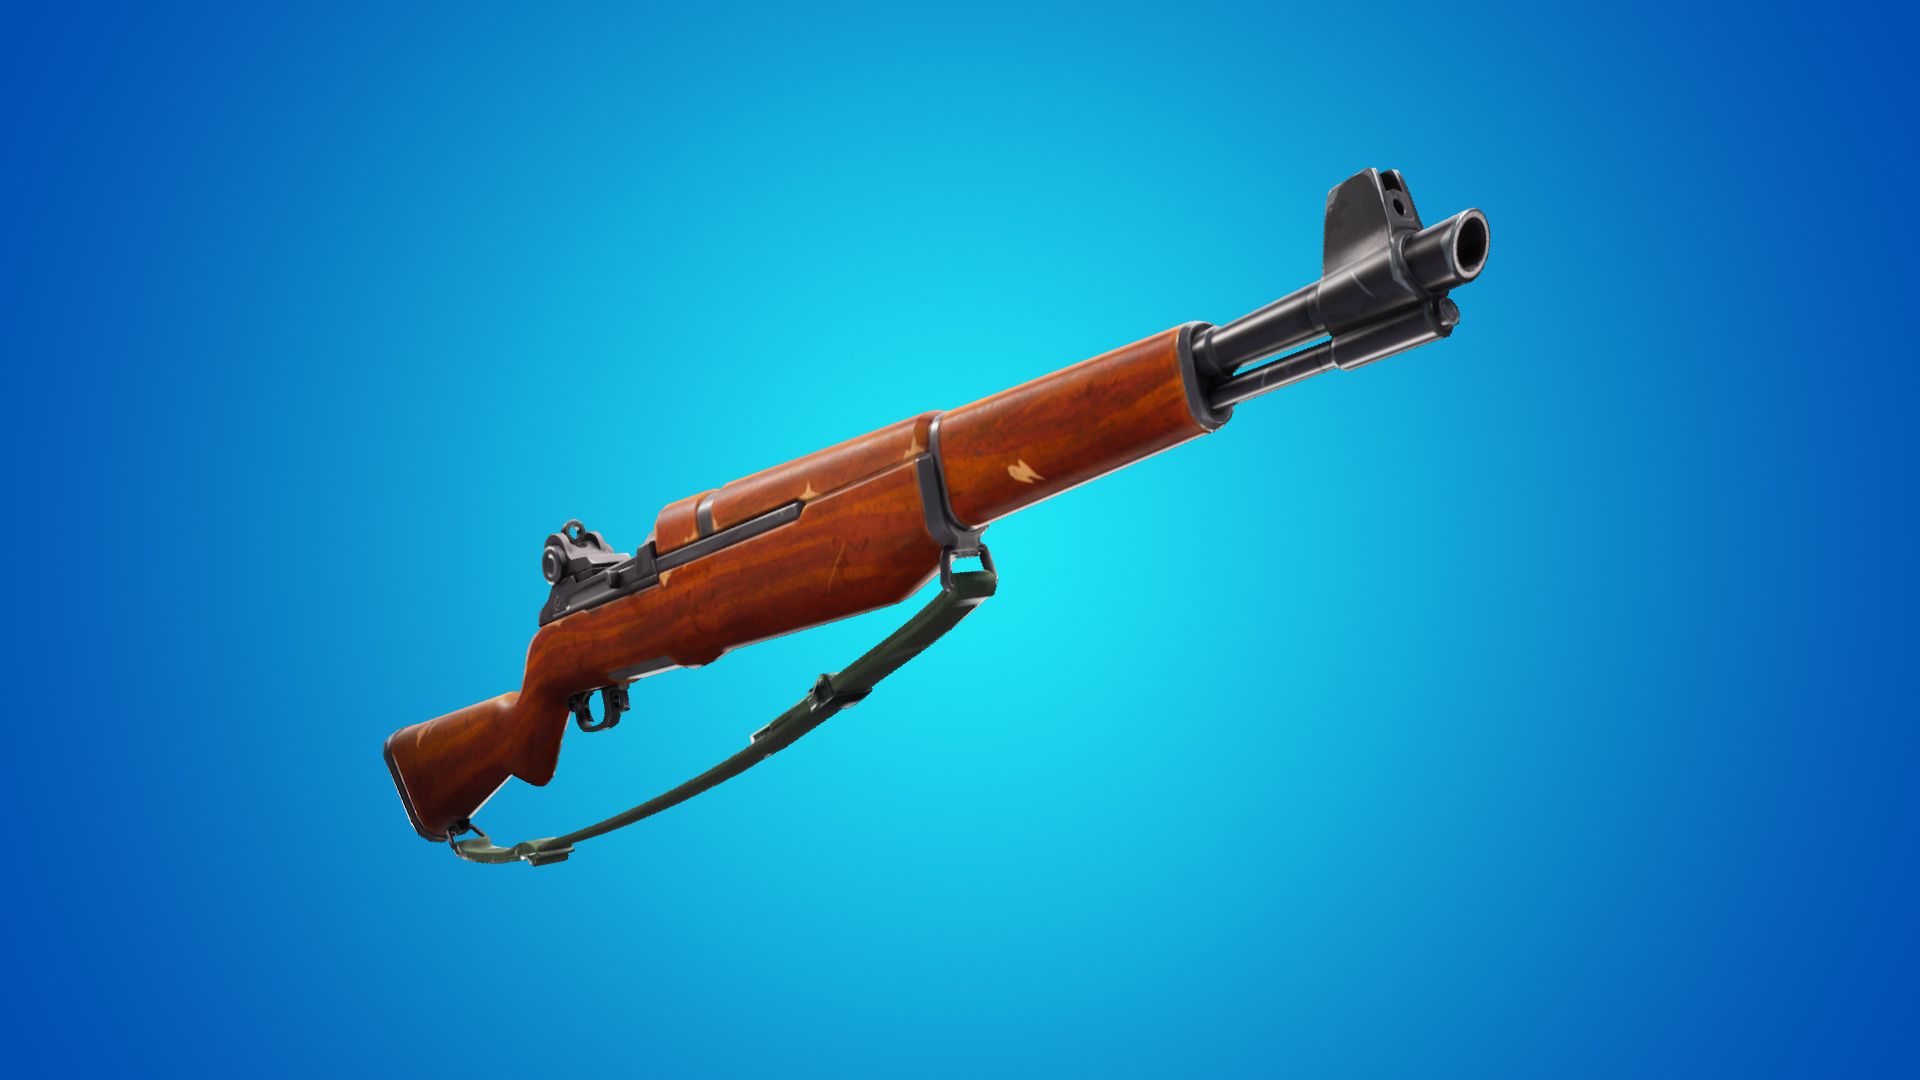 fortnite s v7 40 update patch notes arrive with new weapons and nerfs to hand cannon and stormwings - fortnite x nerf gun